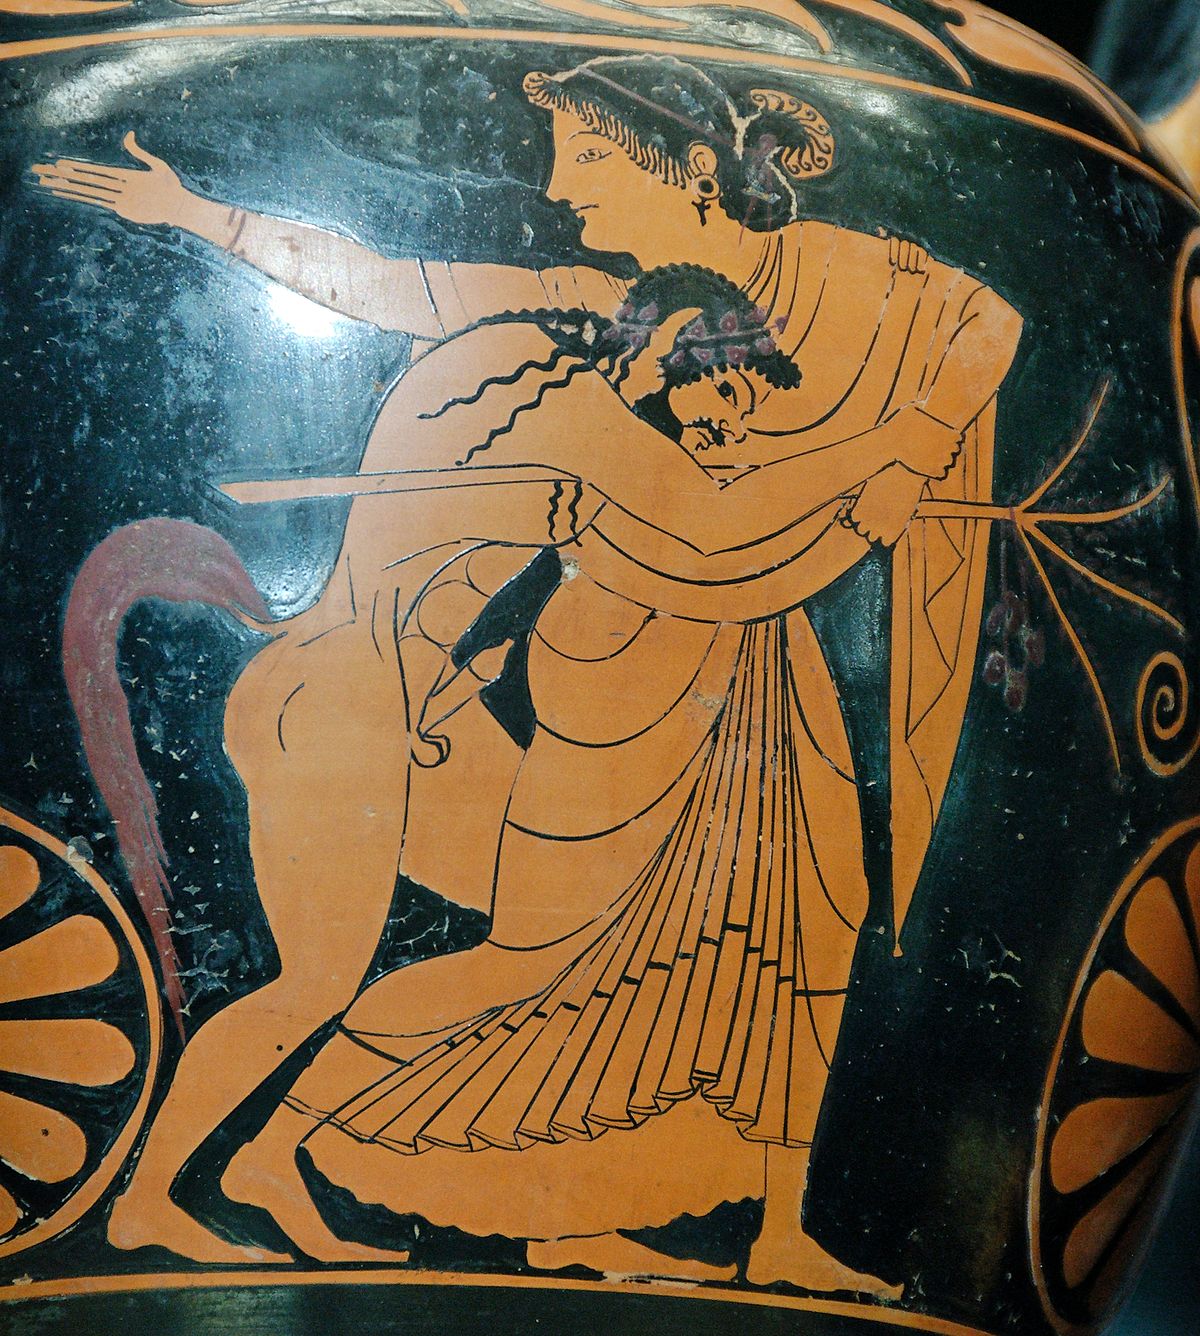 Nymphs and satyrs sex